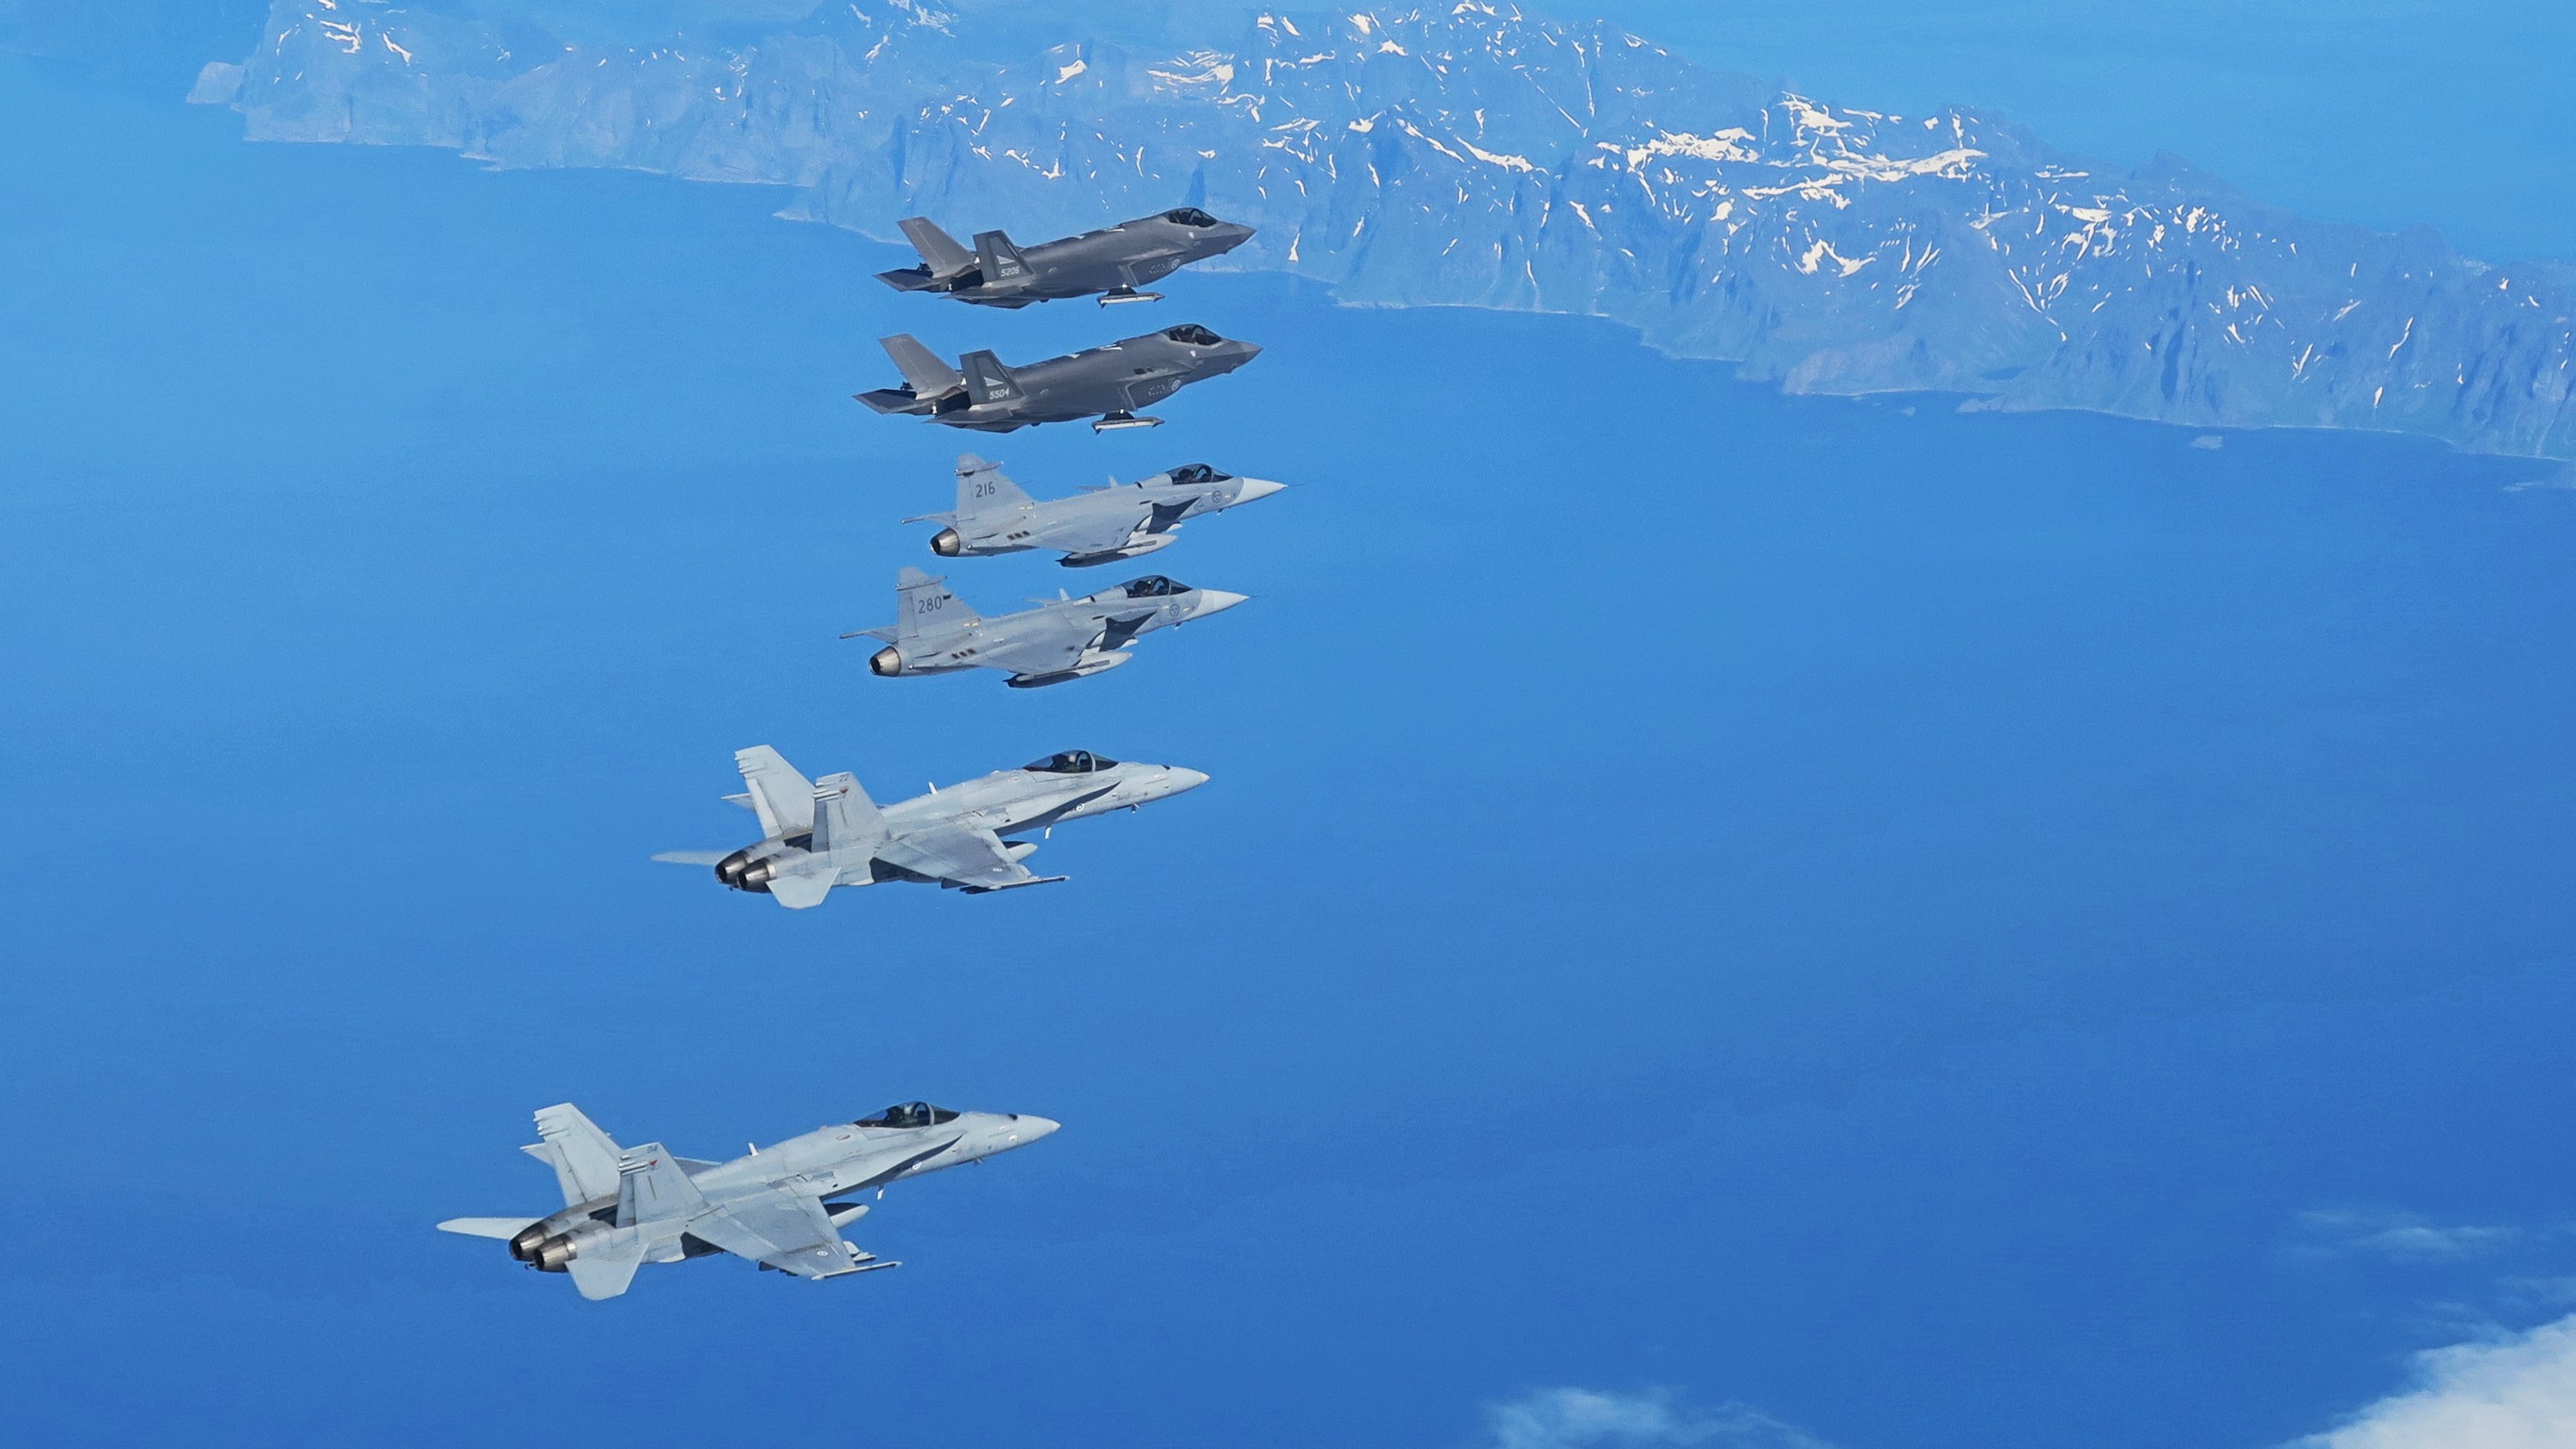 Two Finnish F/A-18 Hornets, two Swedish JAS 39 Gripens and two Norwegian F-35As.